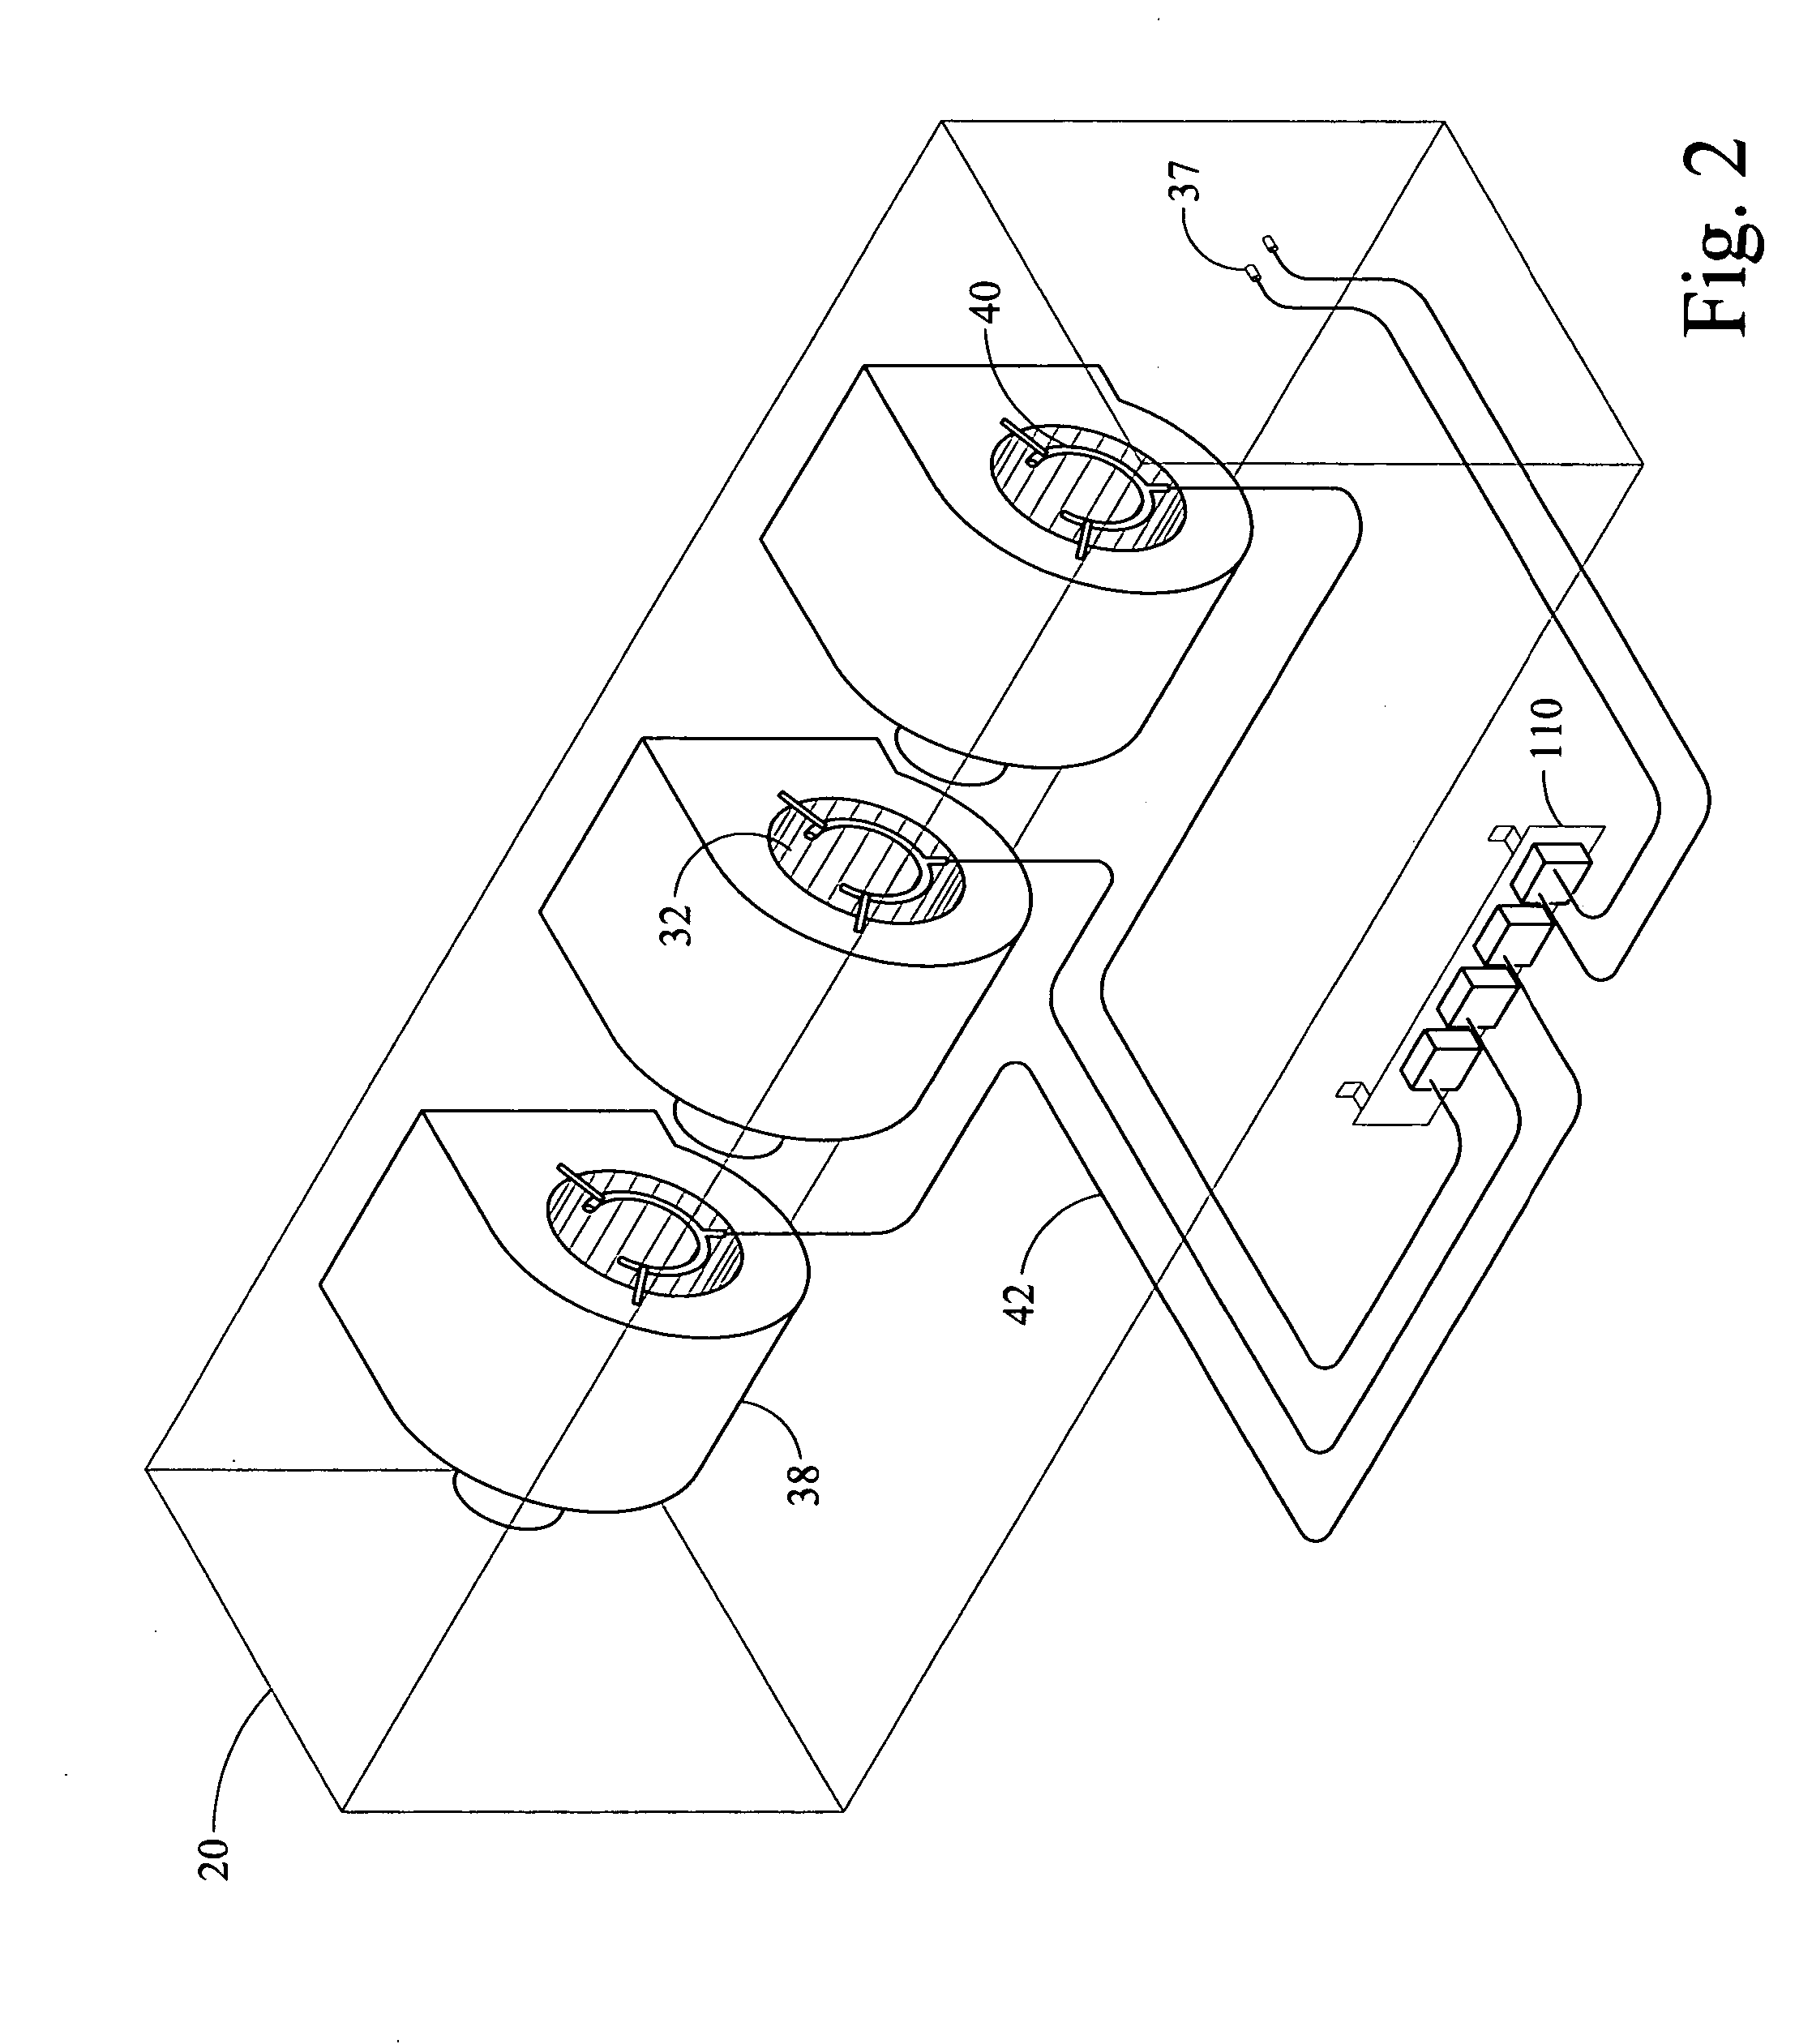 System for providing and managing a laminar flow of clean air